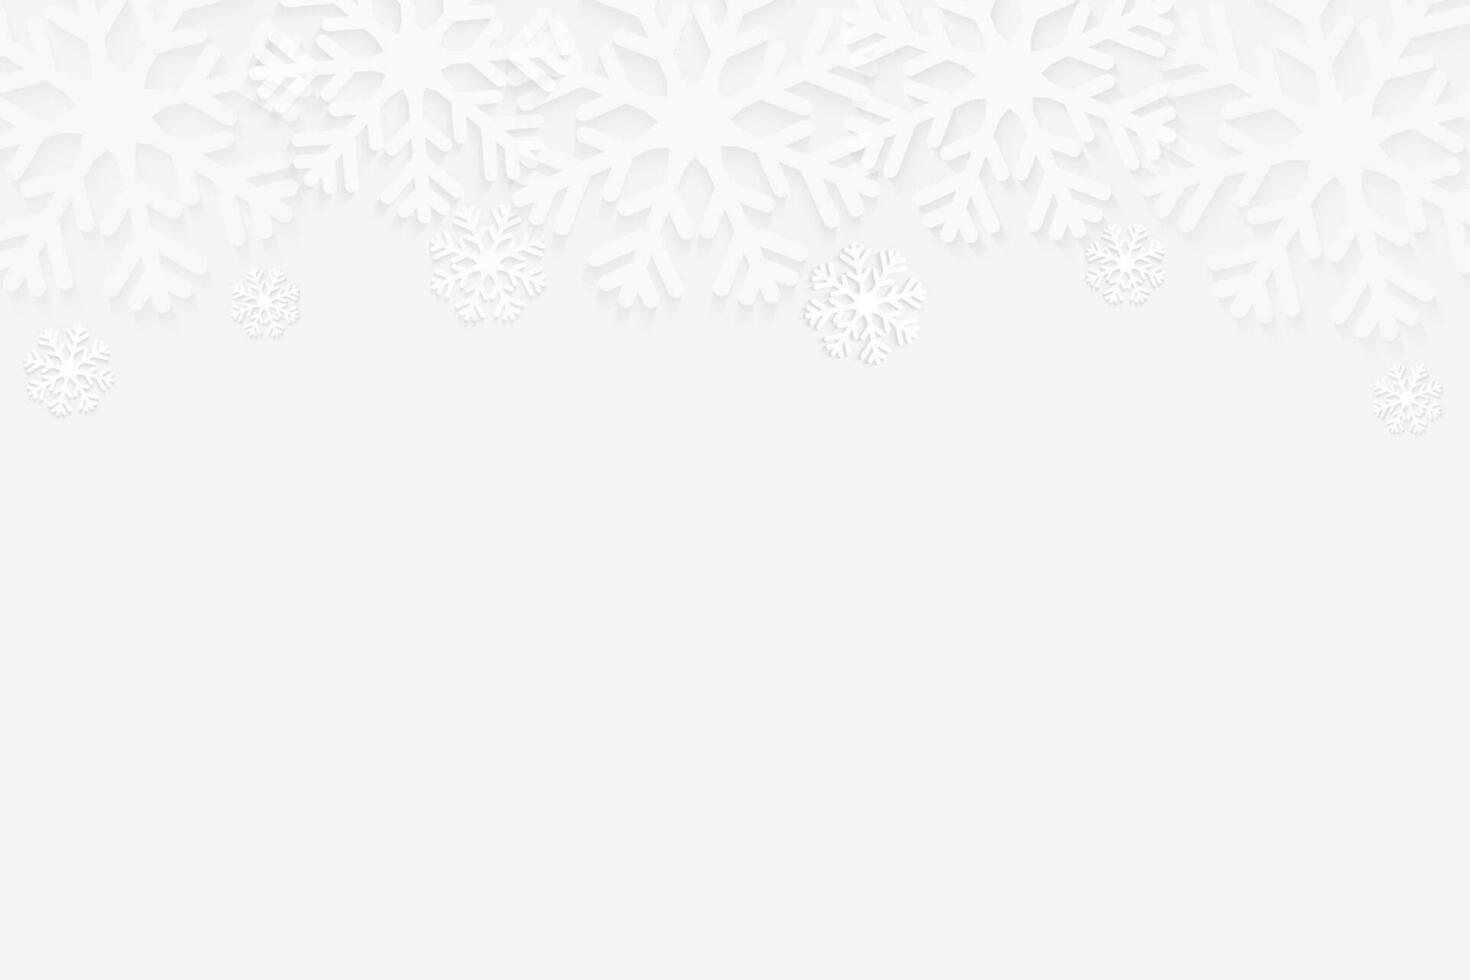 Abstract winter snowflakes background with copy space. vector